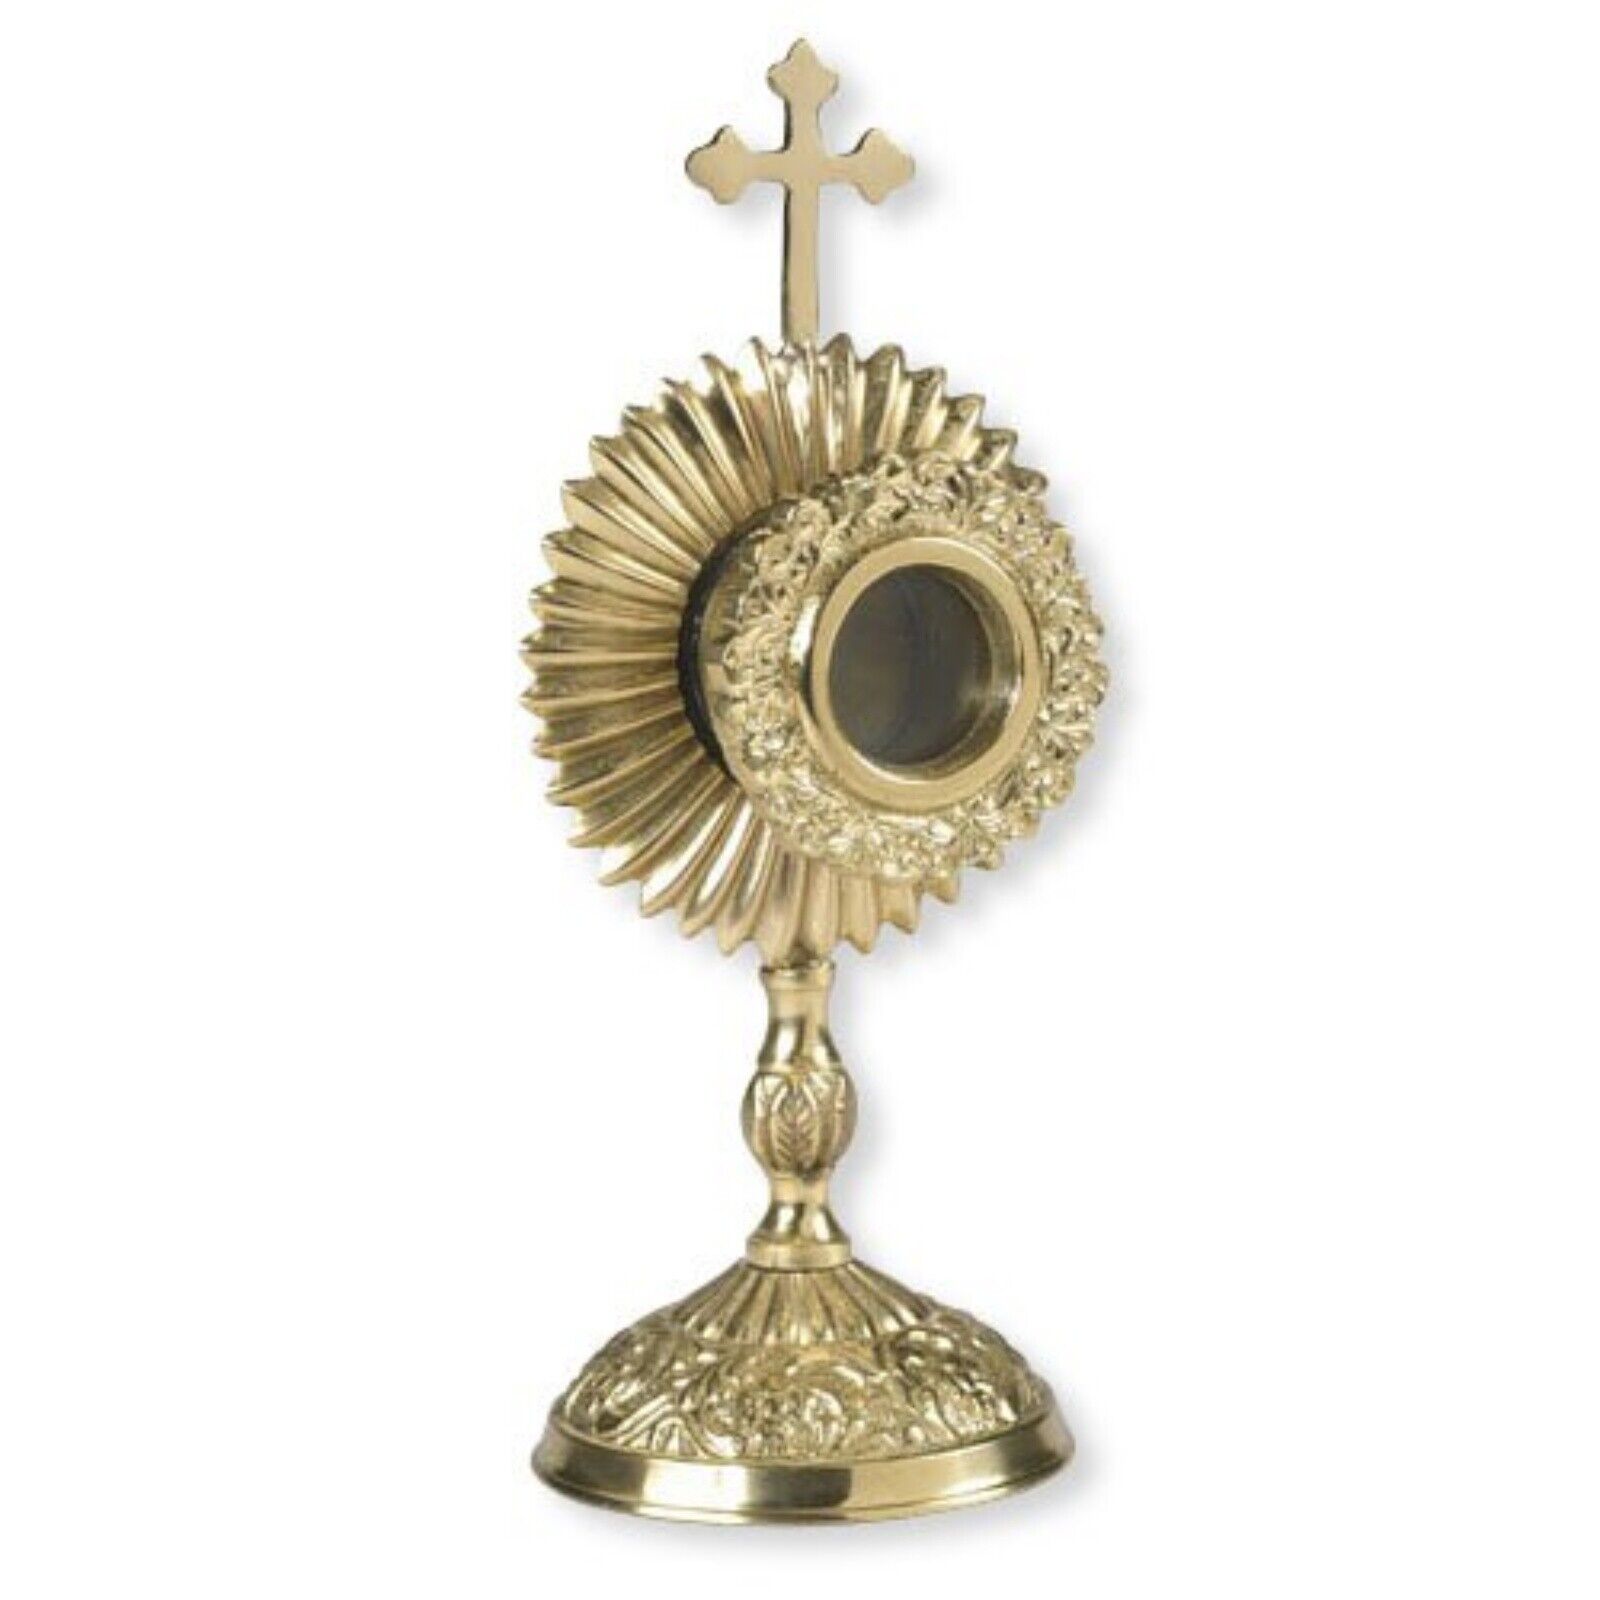 N.G. Brass Round Personal Reliquary Catholic Relic Holder, 6 1/4 Inch